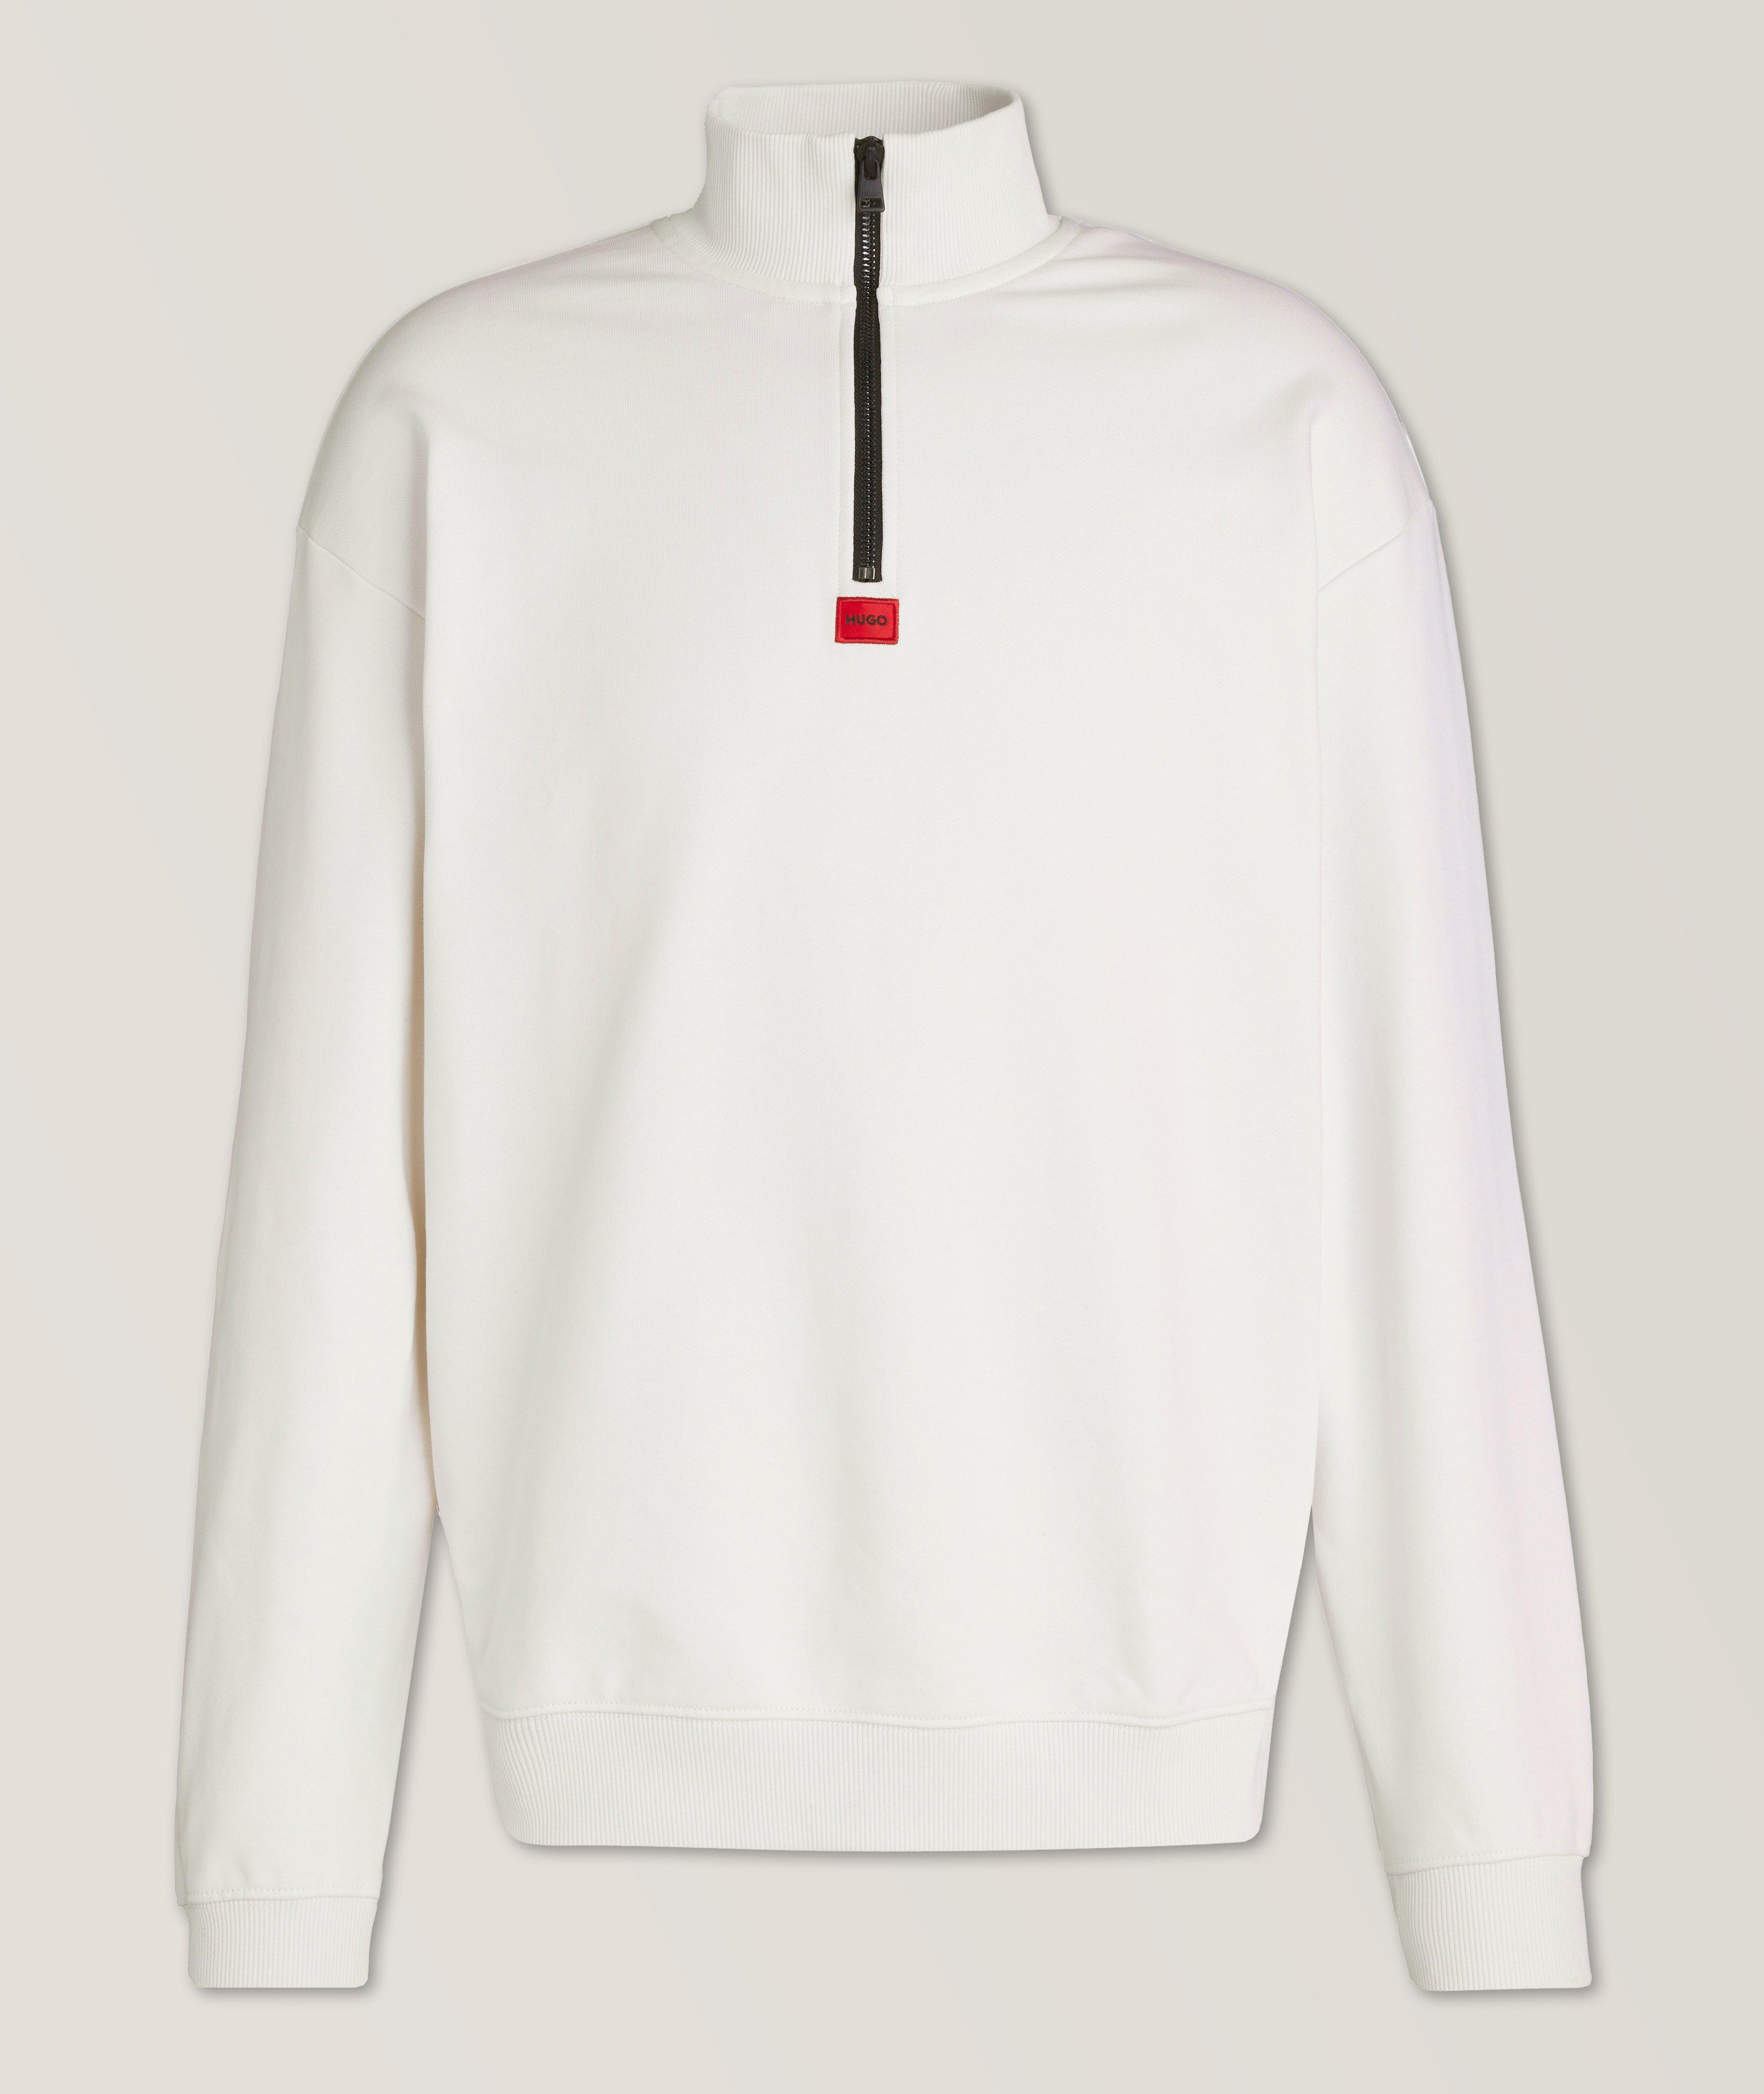 French Terry Cotton Quarter-Zip Sweater image 0